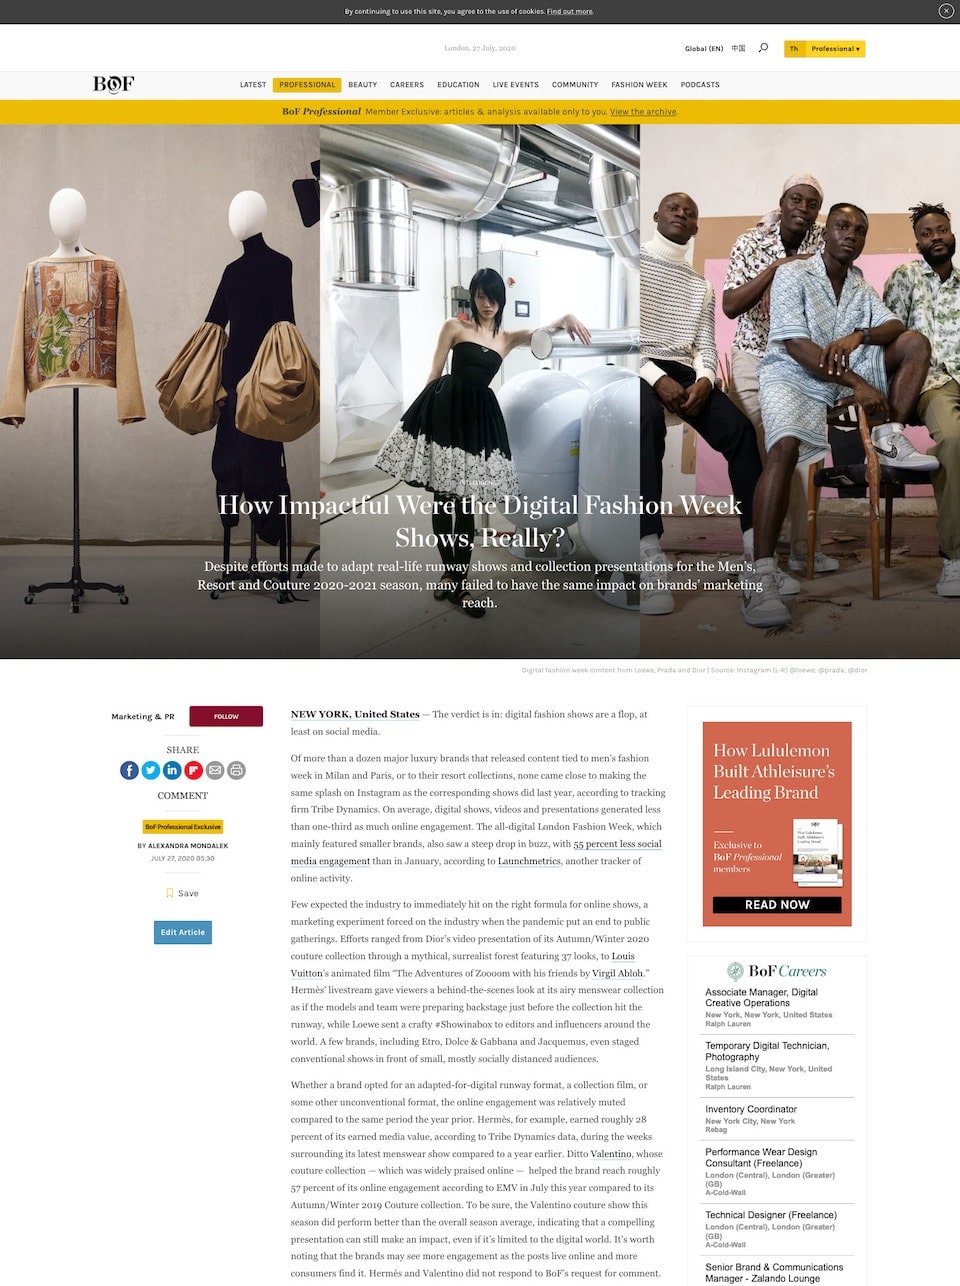 Business of Fashion site image